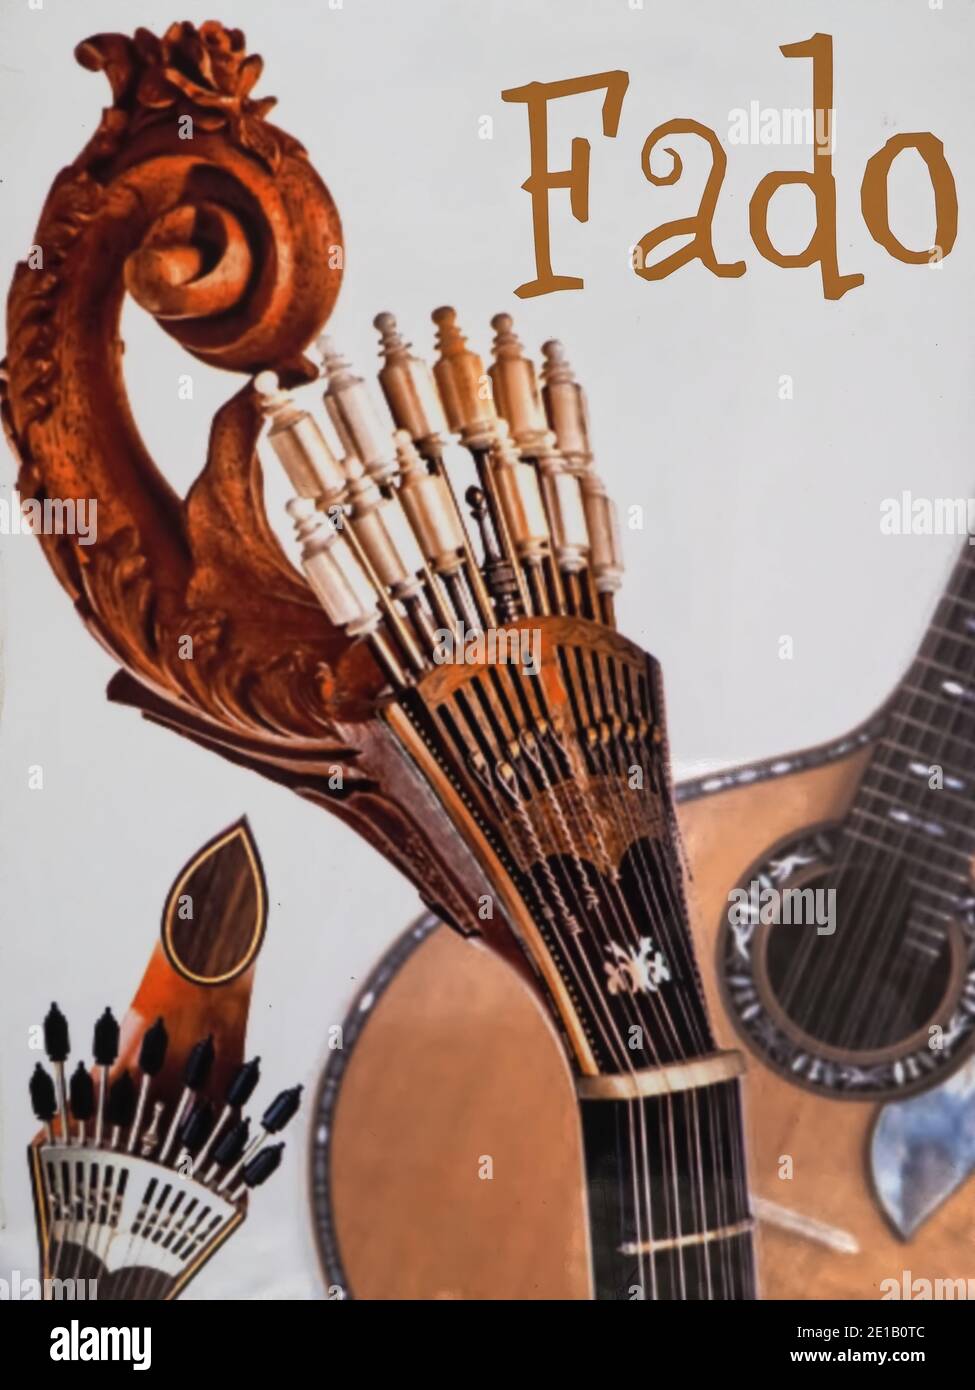 Traditional art in Lisbon - painting of Fado music Stock Photo